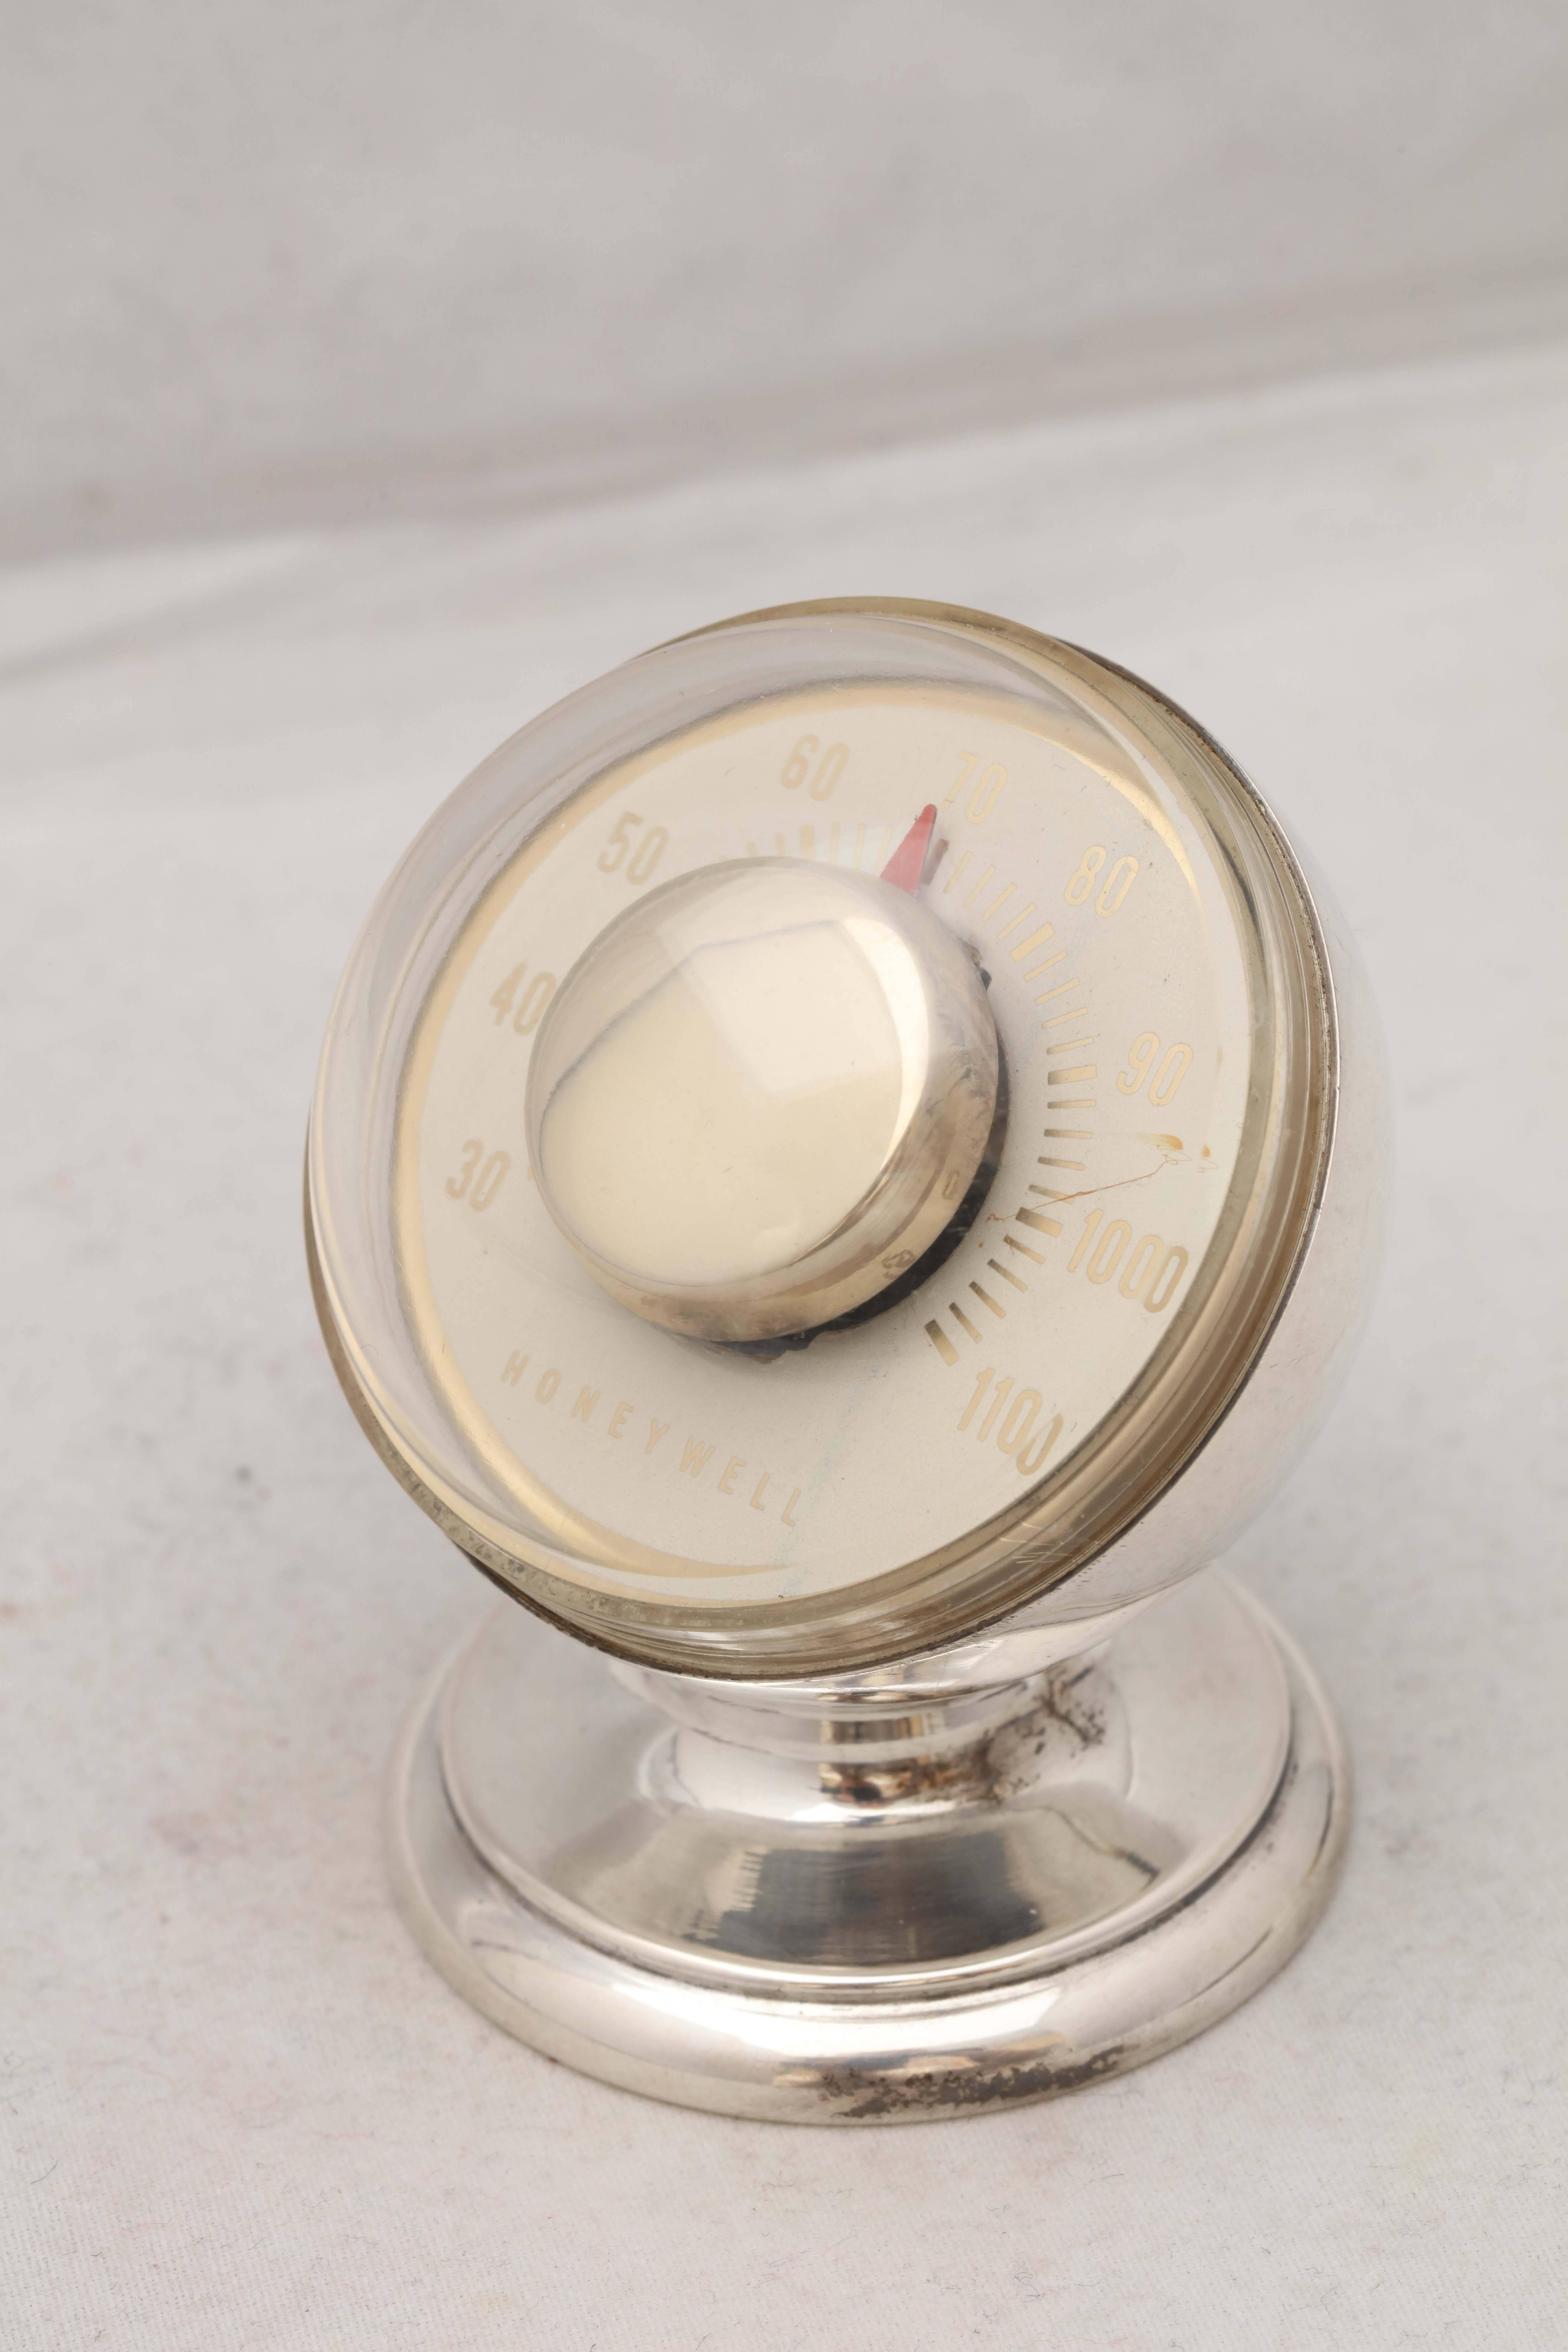 Tiffany Sterling Silver Mid-Century Modern Desk Thermometer 1